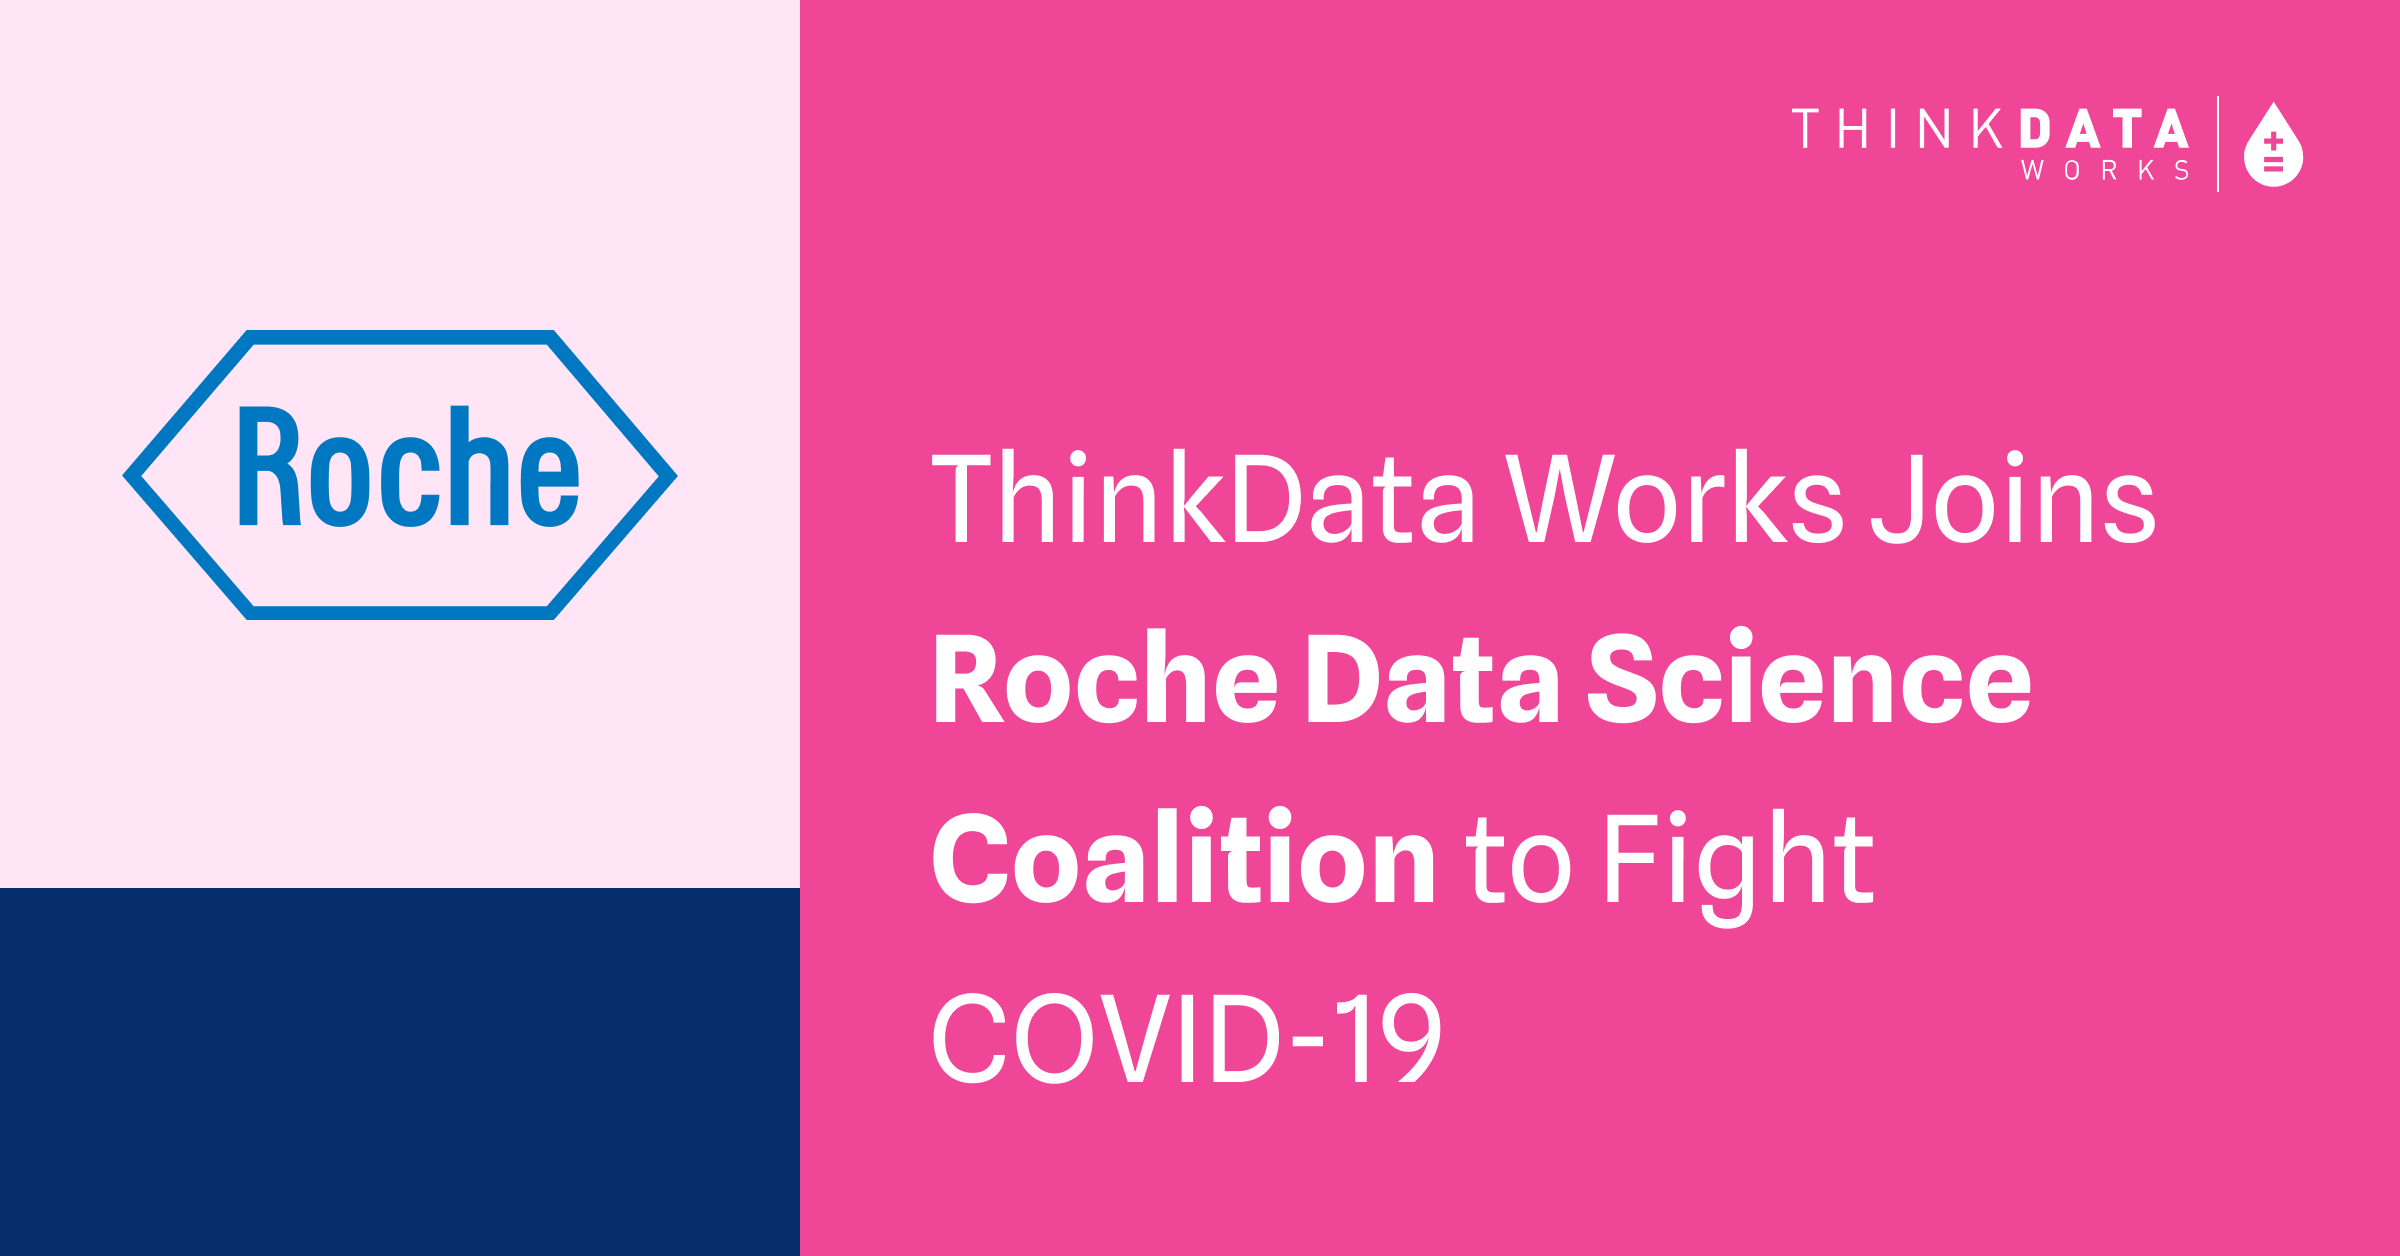 ThinkData Works joins Roche Data Science Coalition